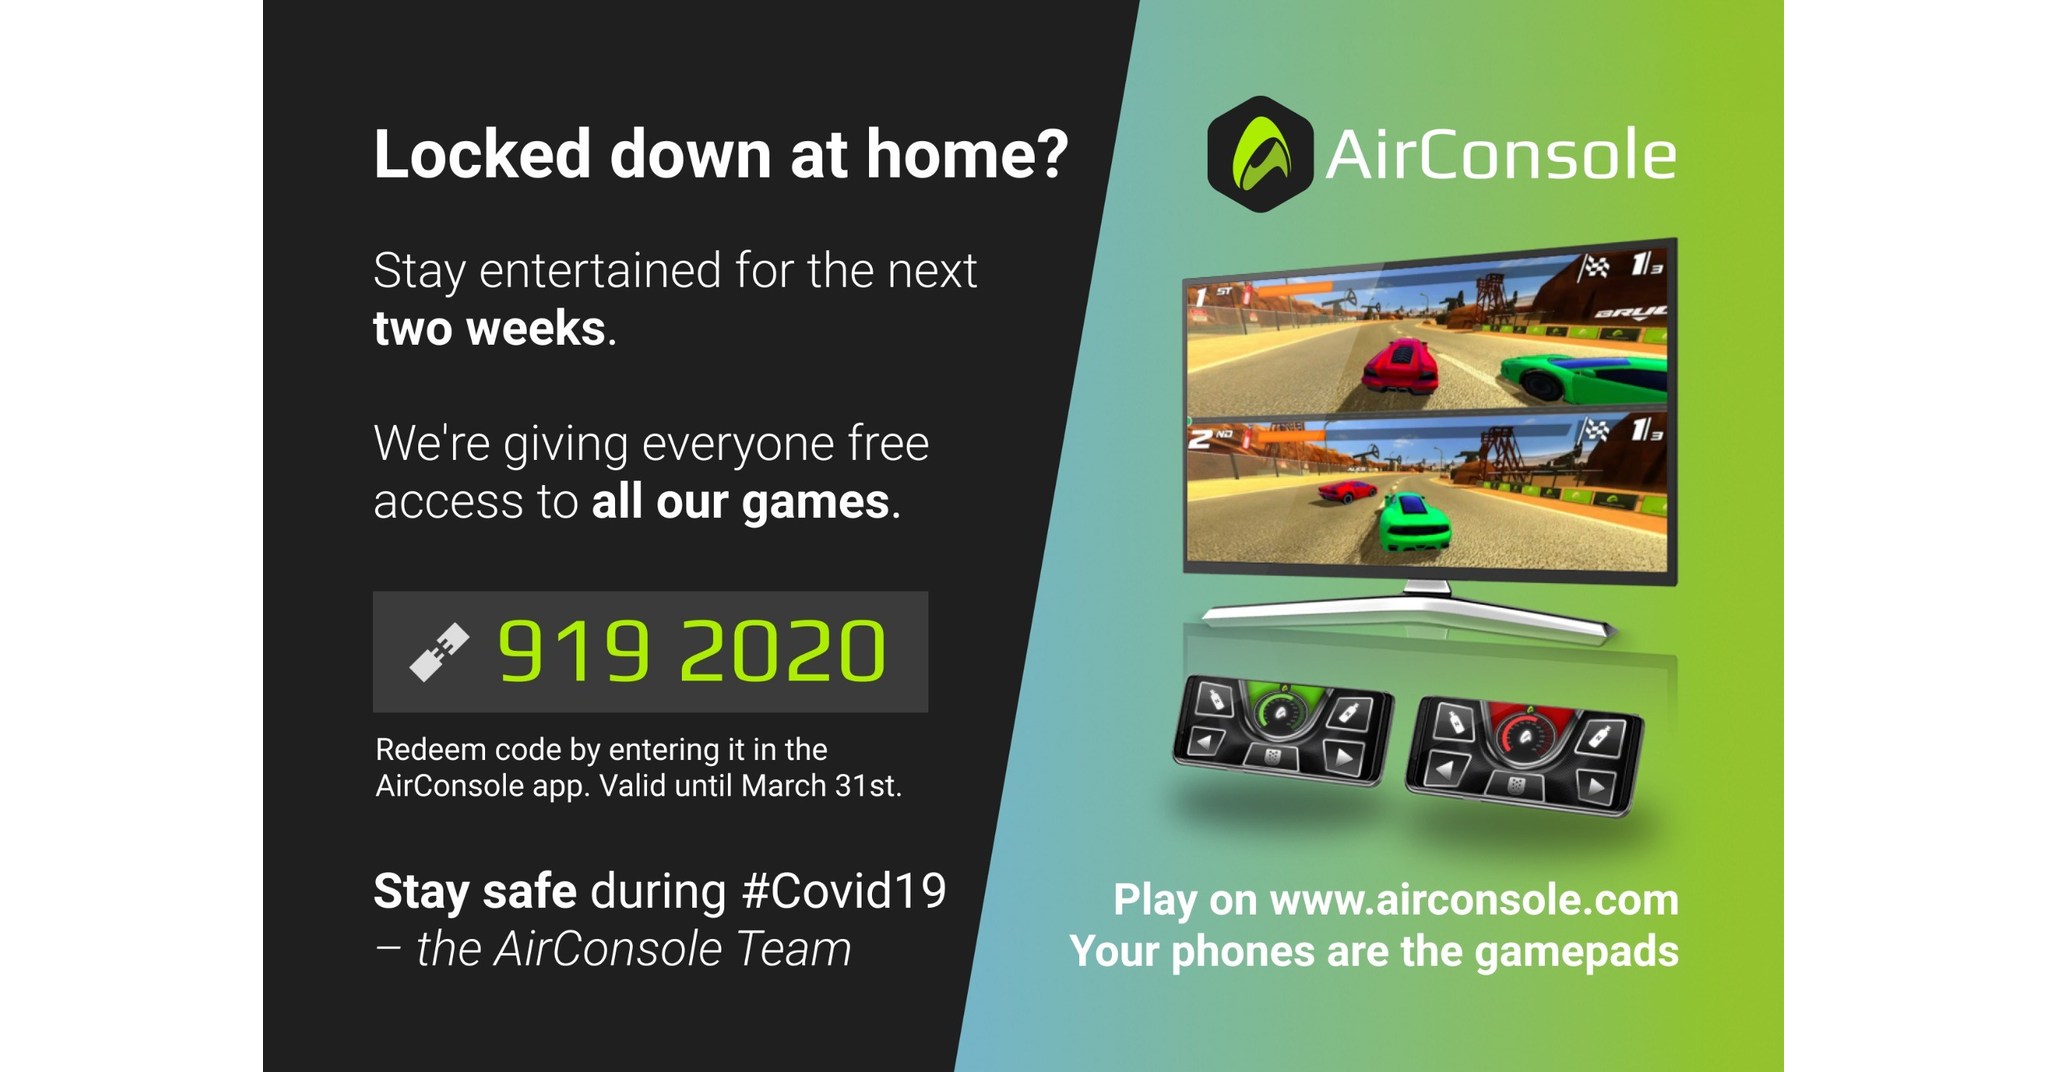 Airconsole Is Giving Everyone Free Access To All Of Their Video